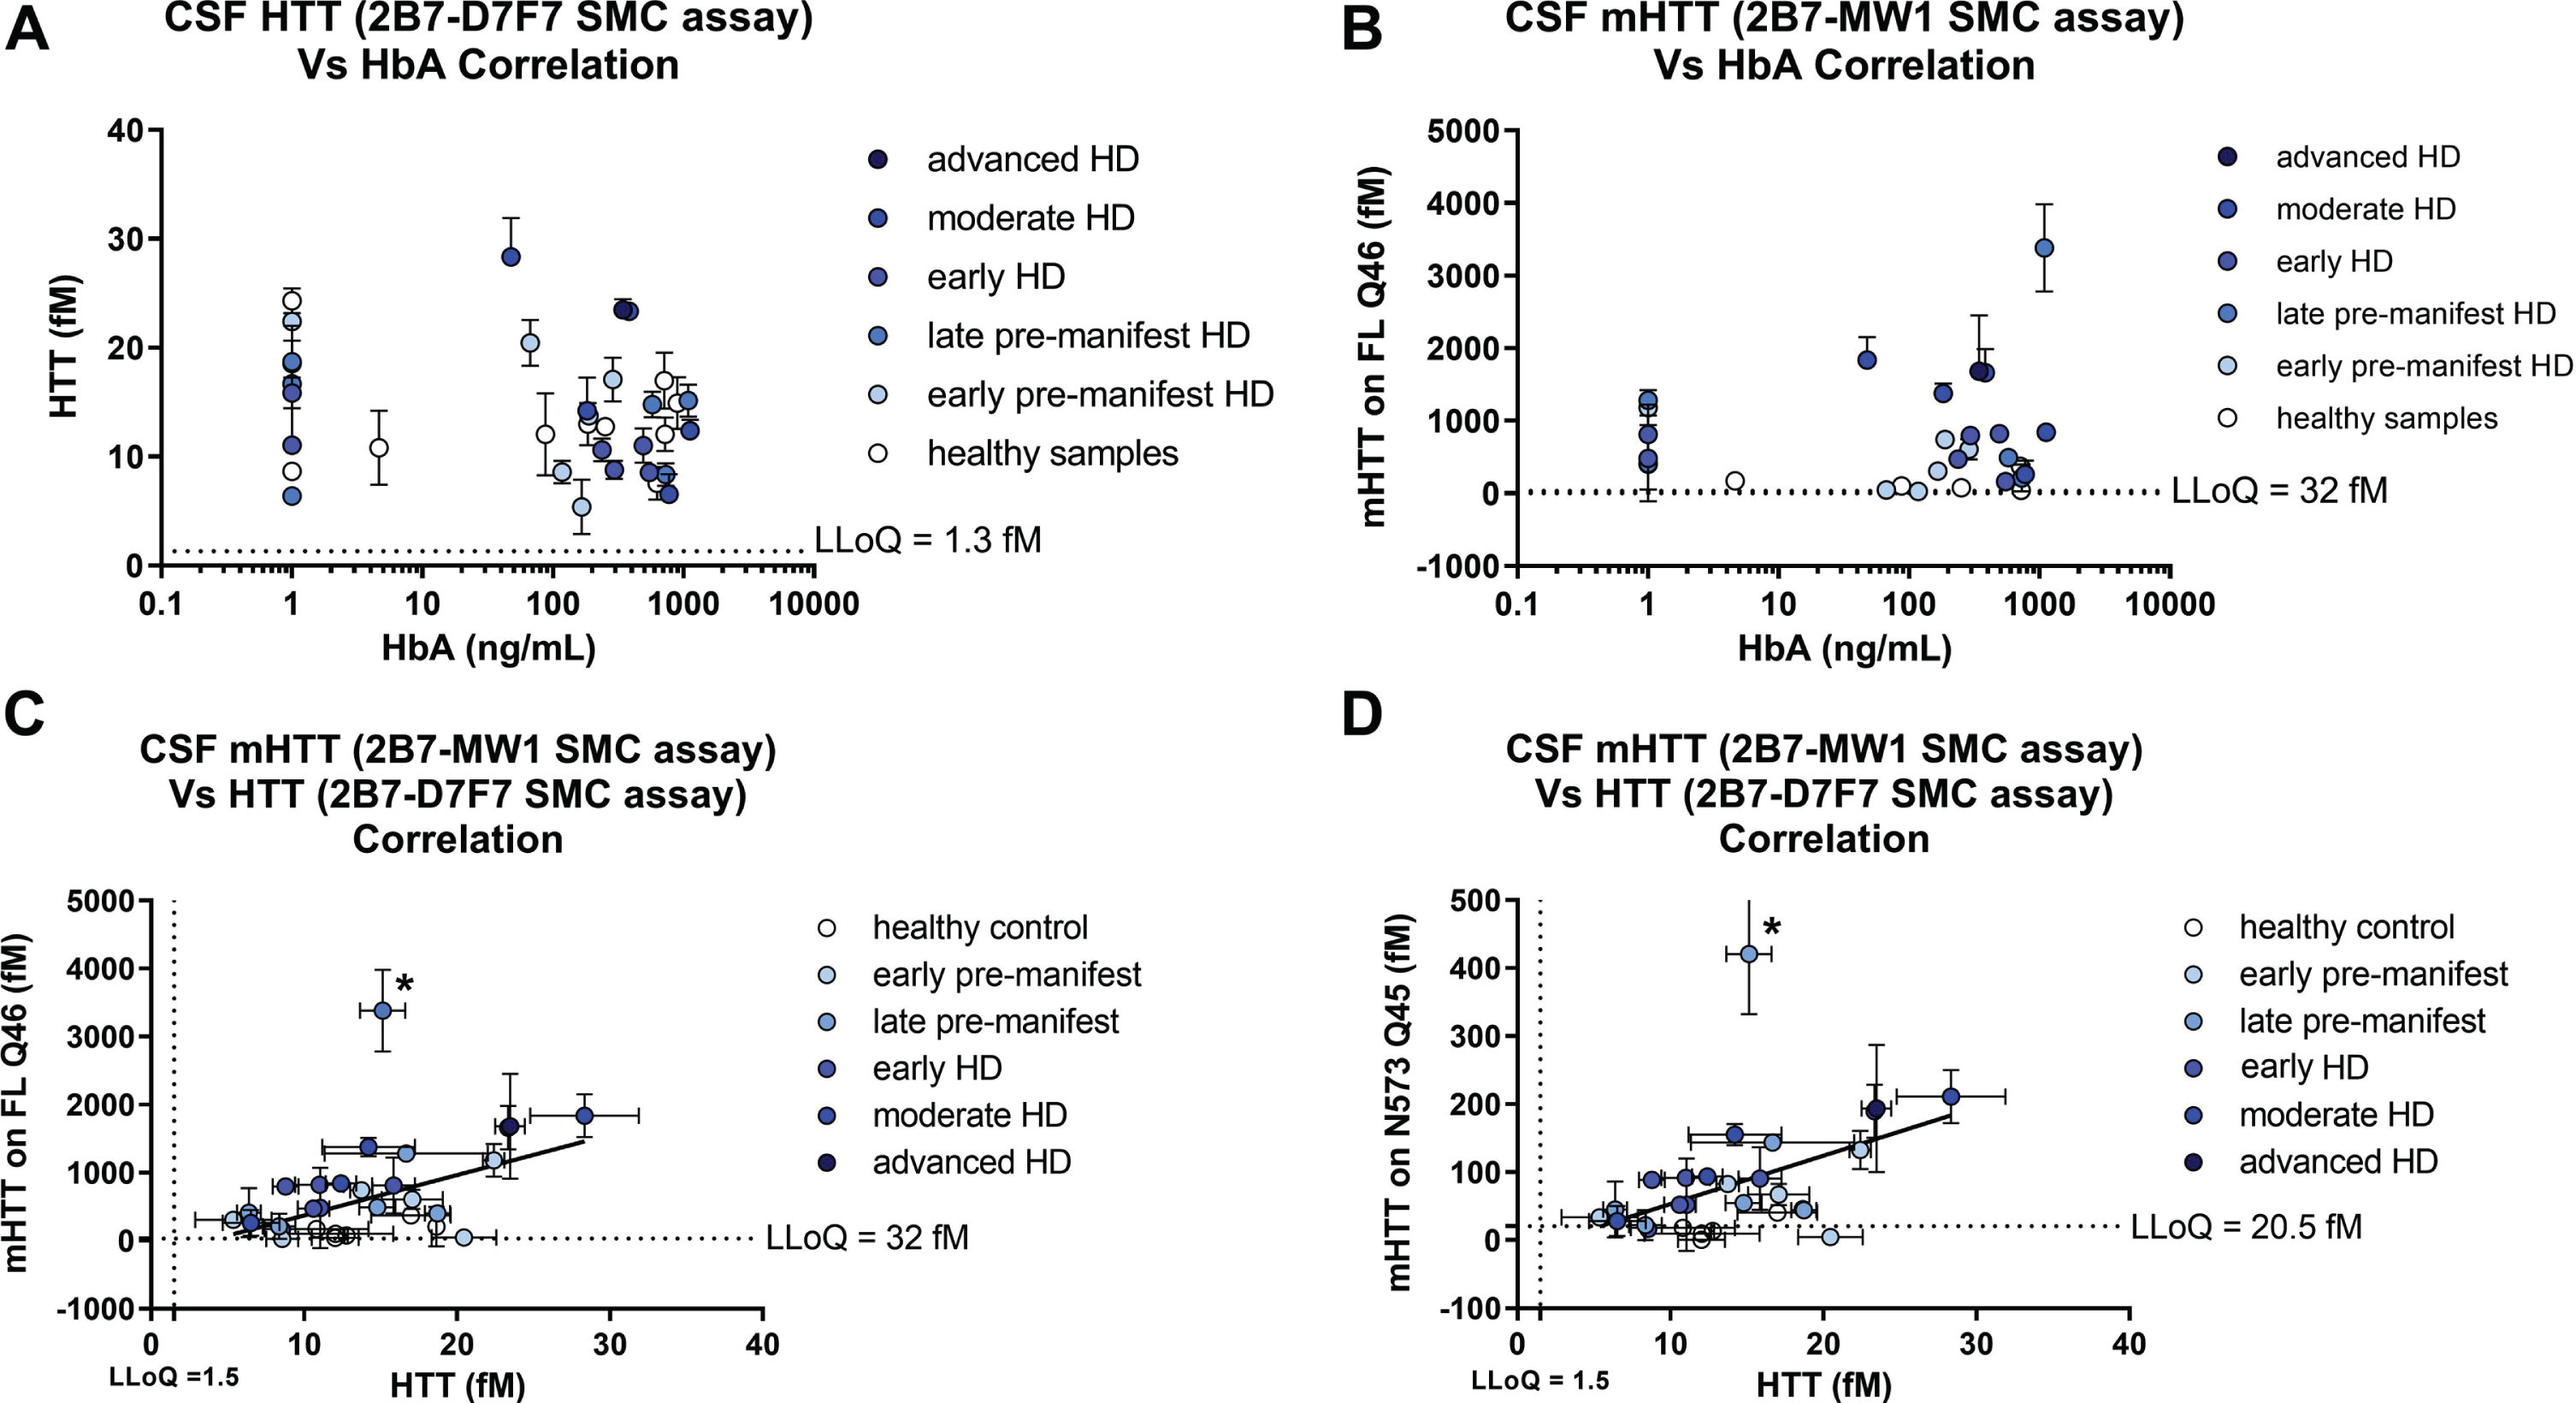 Correlations of CHDI_HTT_143 (2B7-D7F7) SMC assay HTT and CHDI_HTT_040 (2B7-MW1) SMC assay mHTT levels across HD disease stages. Due to non-Gaussian distribution of both HTT and mHTT levels as determined by the Shapiro-Wilk test, the correlation tests were carried out by a non-parametric Spearman correlation test. All samples are reported as the average and standard deviation of three technical replicates and concentrations are relative quantitative values. A) Correlation between CHDI_HTT_143 (2B7-D7F7) SMC assay HTT and HbA: p = 0.119, r = –0.26, 95% confidence interval = –0.55 to 0.08. B) Correlation between mHTT and HbA: p = 0.98, r = 0.004, 95% confidence interval = –0.37 to 0.37. C) Correlation between mHTT (as calculated against the FL Q46 HTT calibrator) and CHDI_HTT_143 (2B7-D7F7) SMC assay HTT levels in human CSF: p = 0.01, r = 0.47, 95% confidence interval = 0.12 to 0.72. Asterisks in C and D indicate a participant that was excluded from the correlation as an outlier. D) Correlation between mHTT (as calculated against the N573 Q45 HTT calibrator) and CHDI_HTT_143 (2B7-D7F7) SMC assay HTT levels in human CSF: p = 0.0047, r = 0.51, 95% confidence interval = 0.16 to 0.74. Note that when comparing the slopes of the two correlations, the y-axis of (C) and (D) are one order of magnitude different.